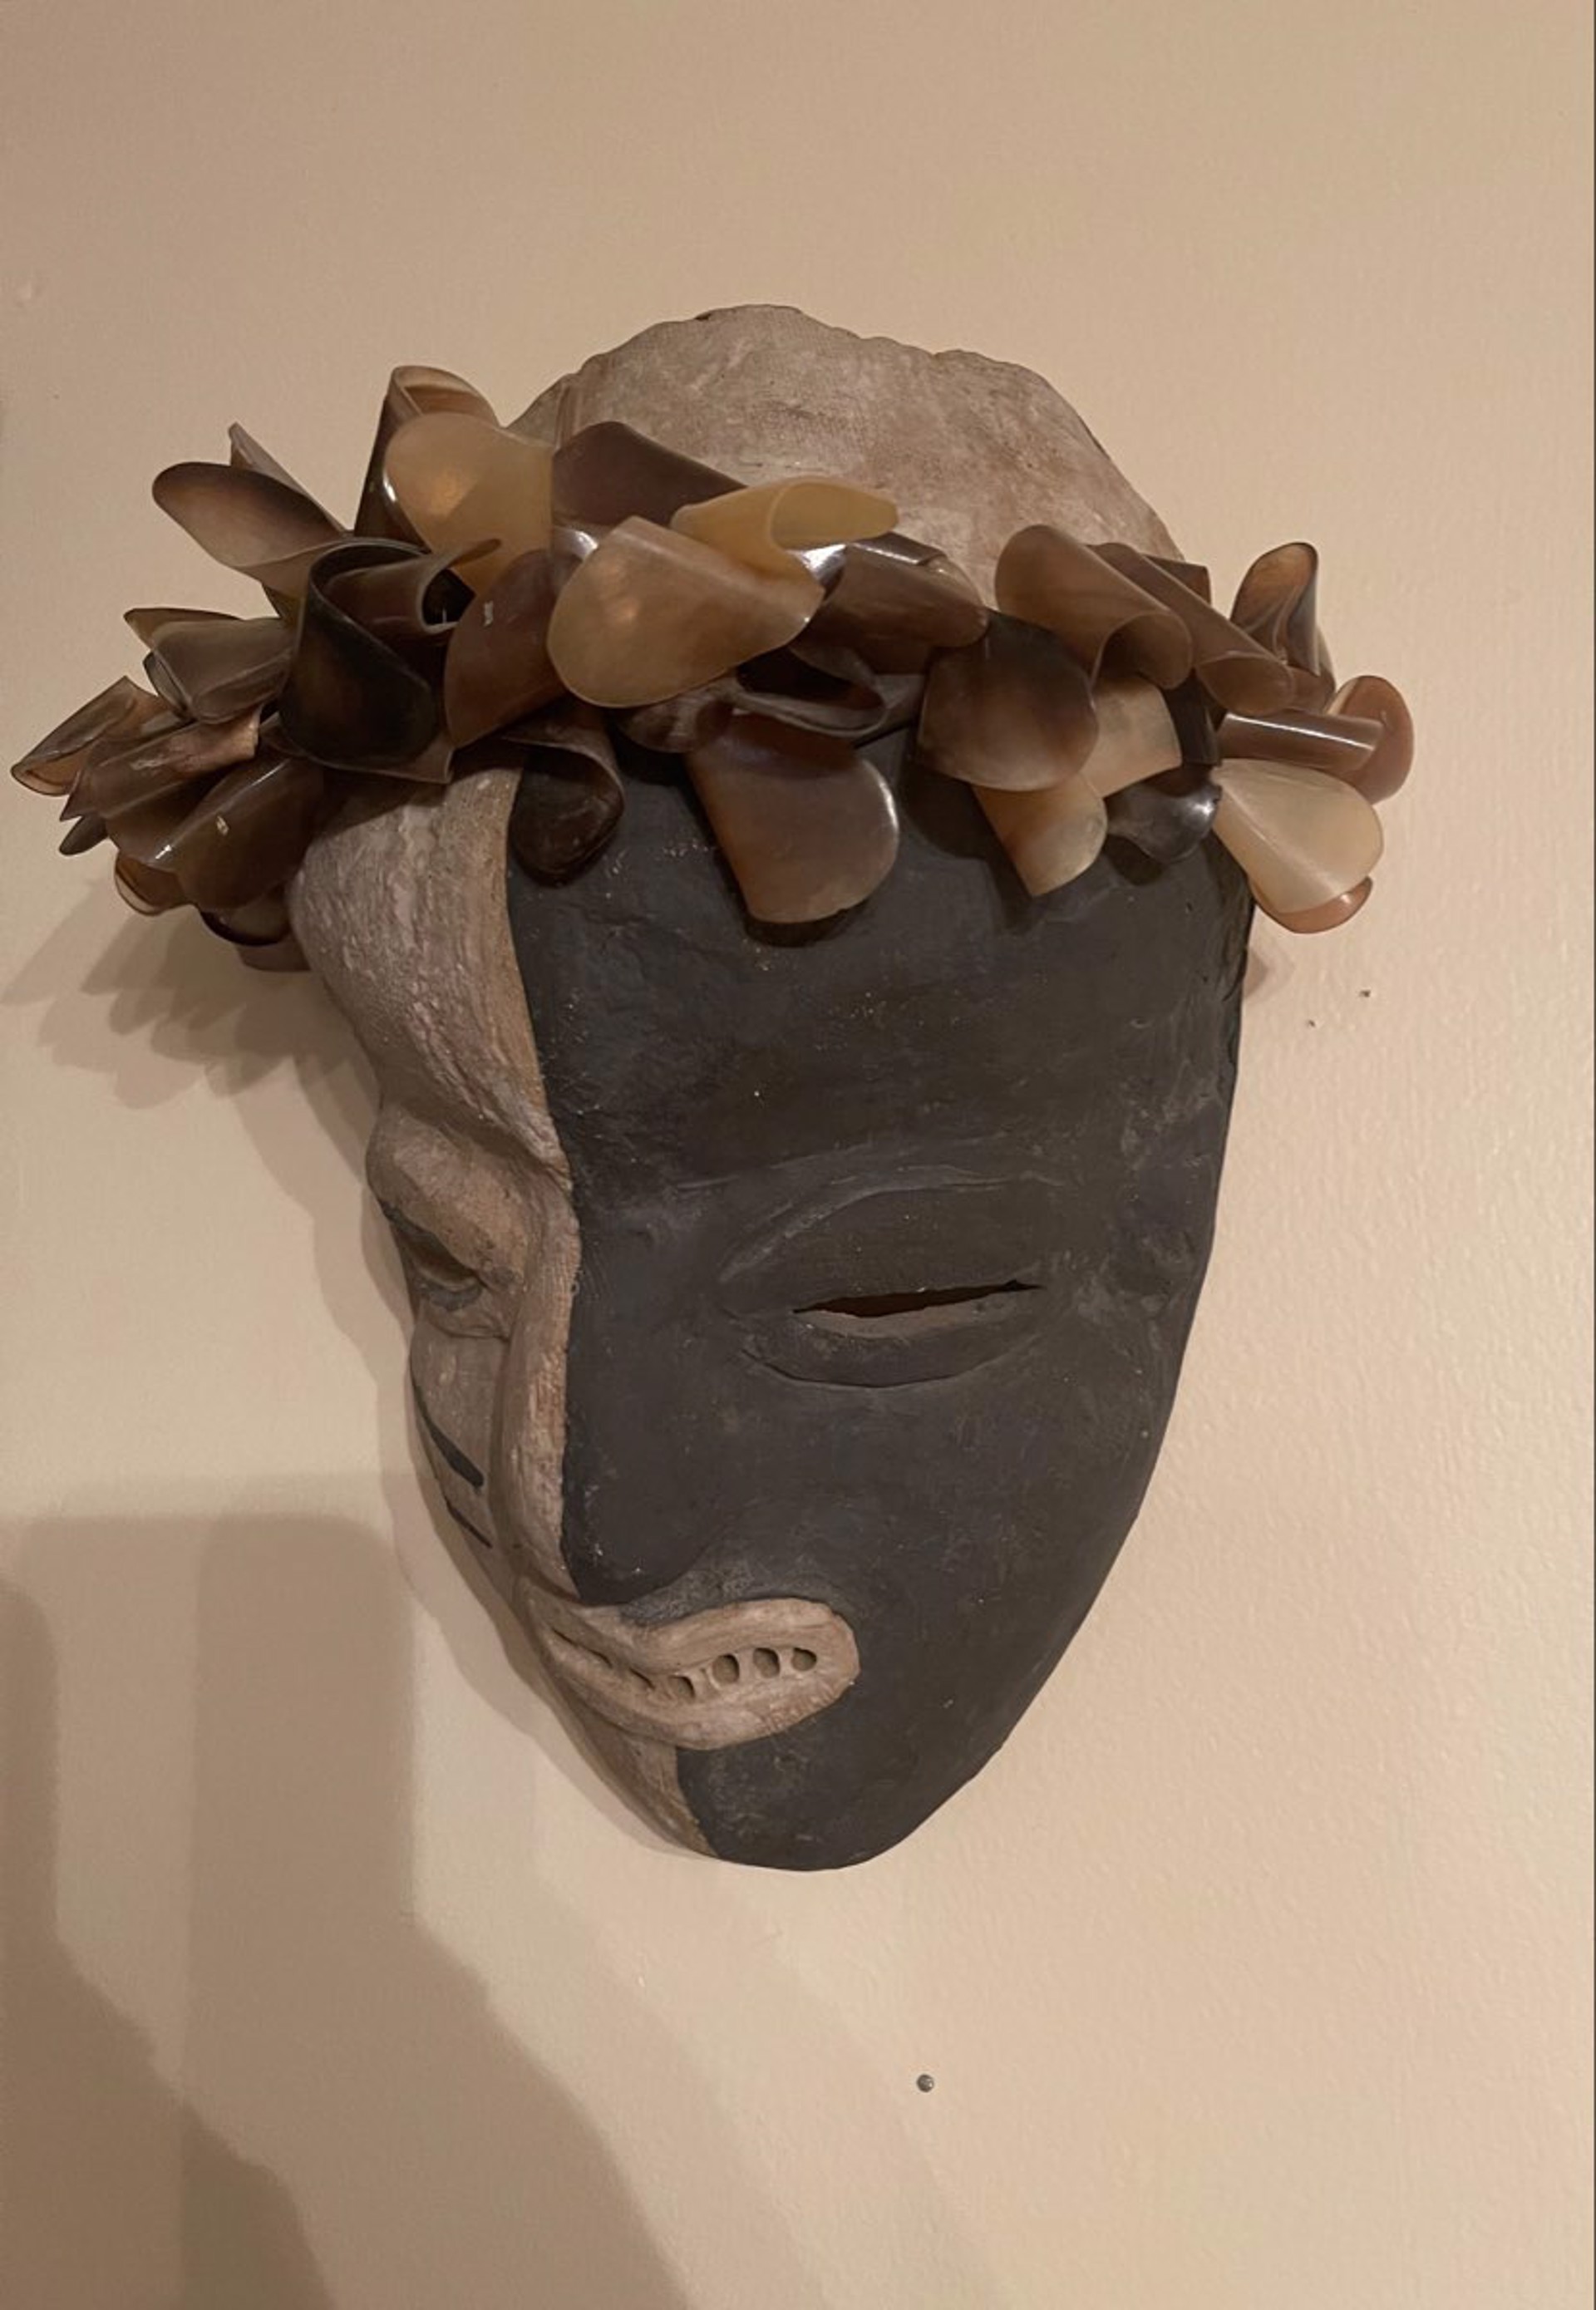 The Horn Mask by Patricia Simpson